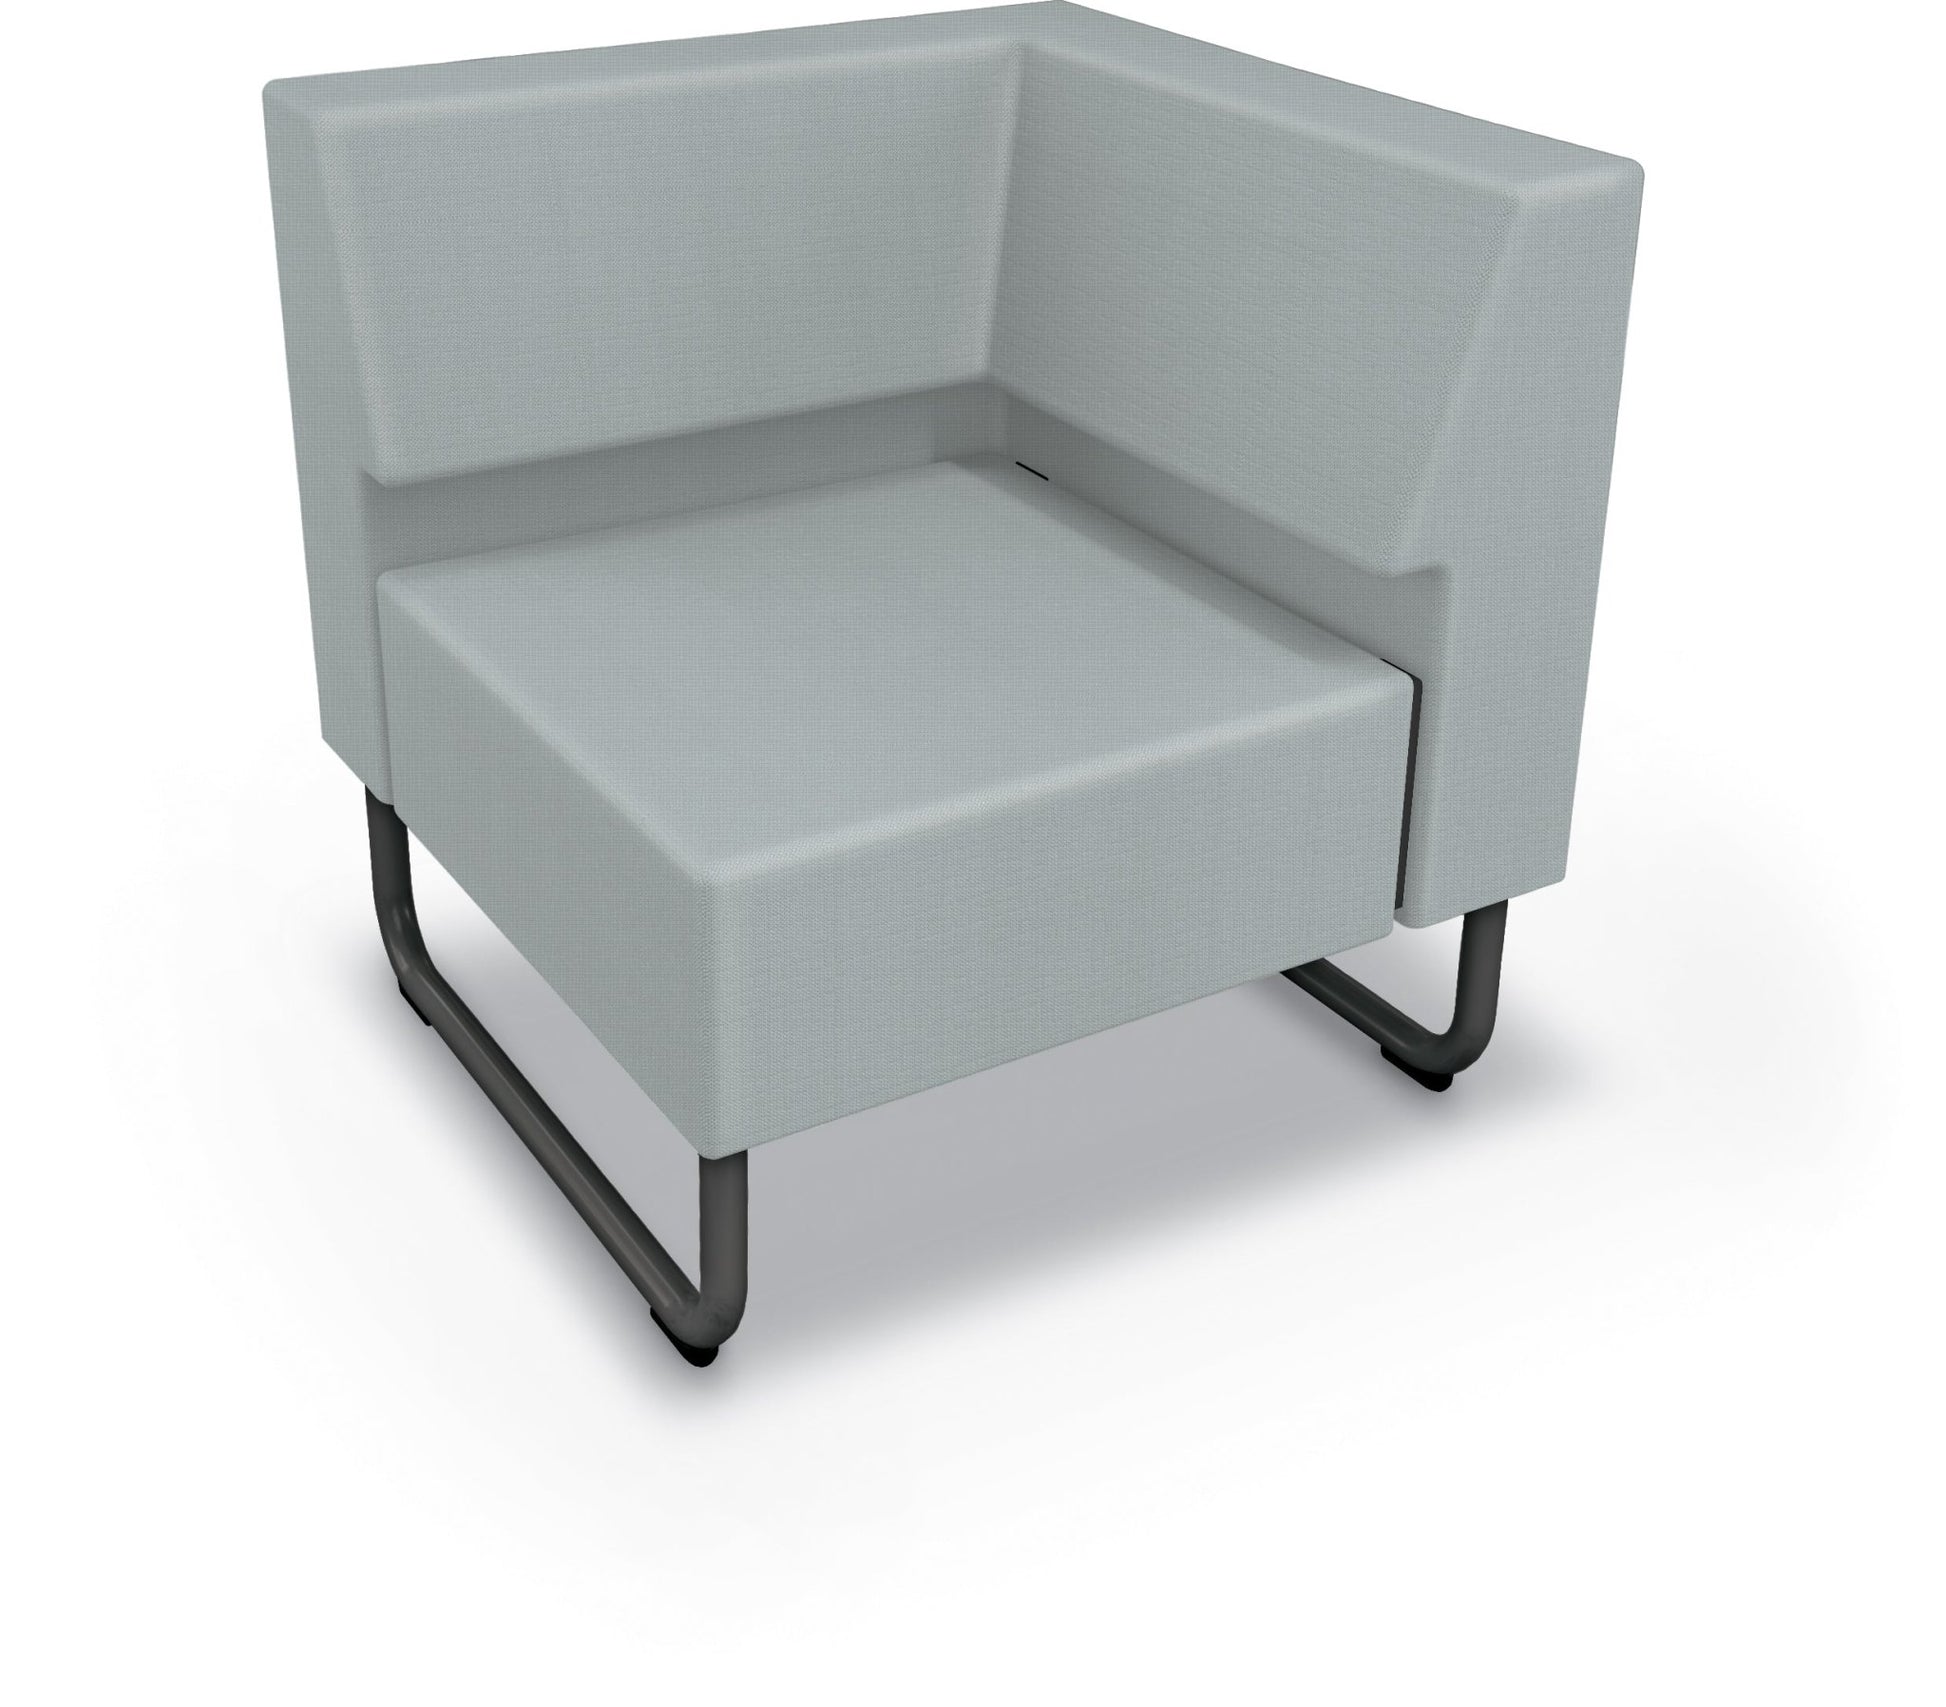 Mooreco Akt Soft Seating Lounge Corner Chair - Grade 02 Fabric and Powder Coated Sled Legs - SchoolOutlet